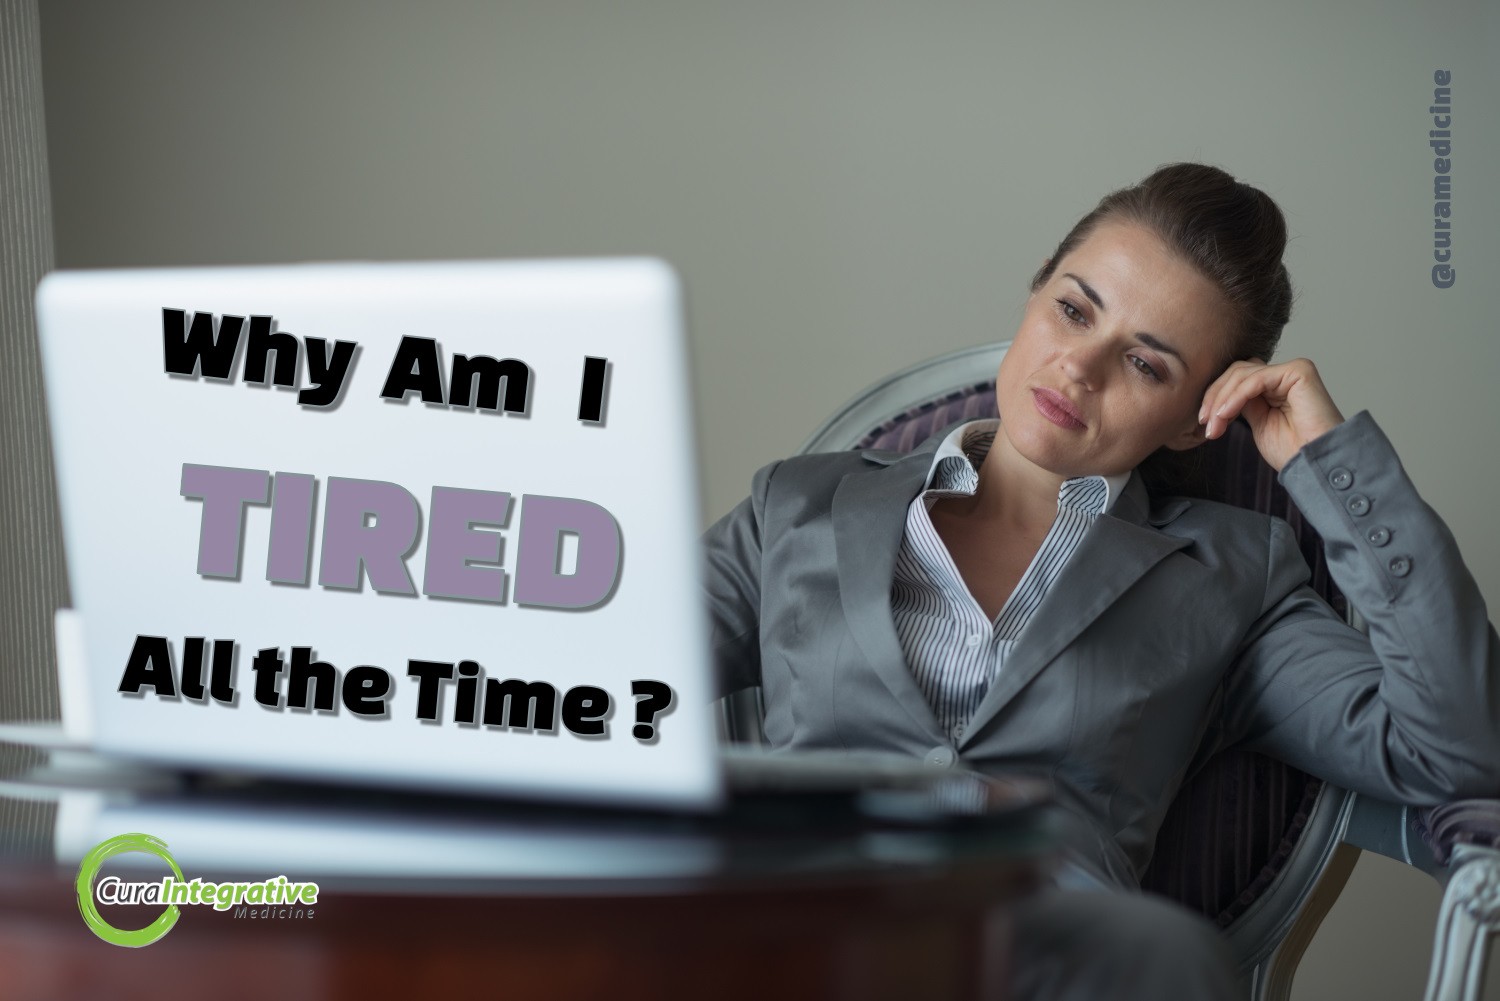 Why Am I Tired All The Time?